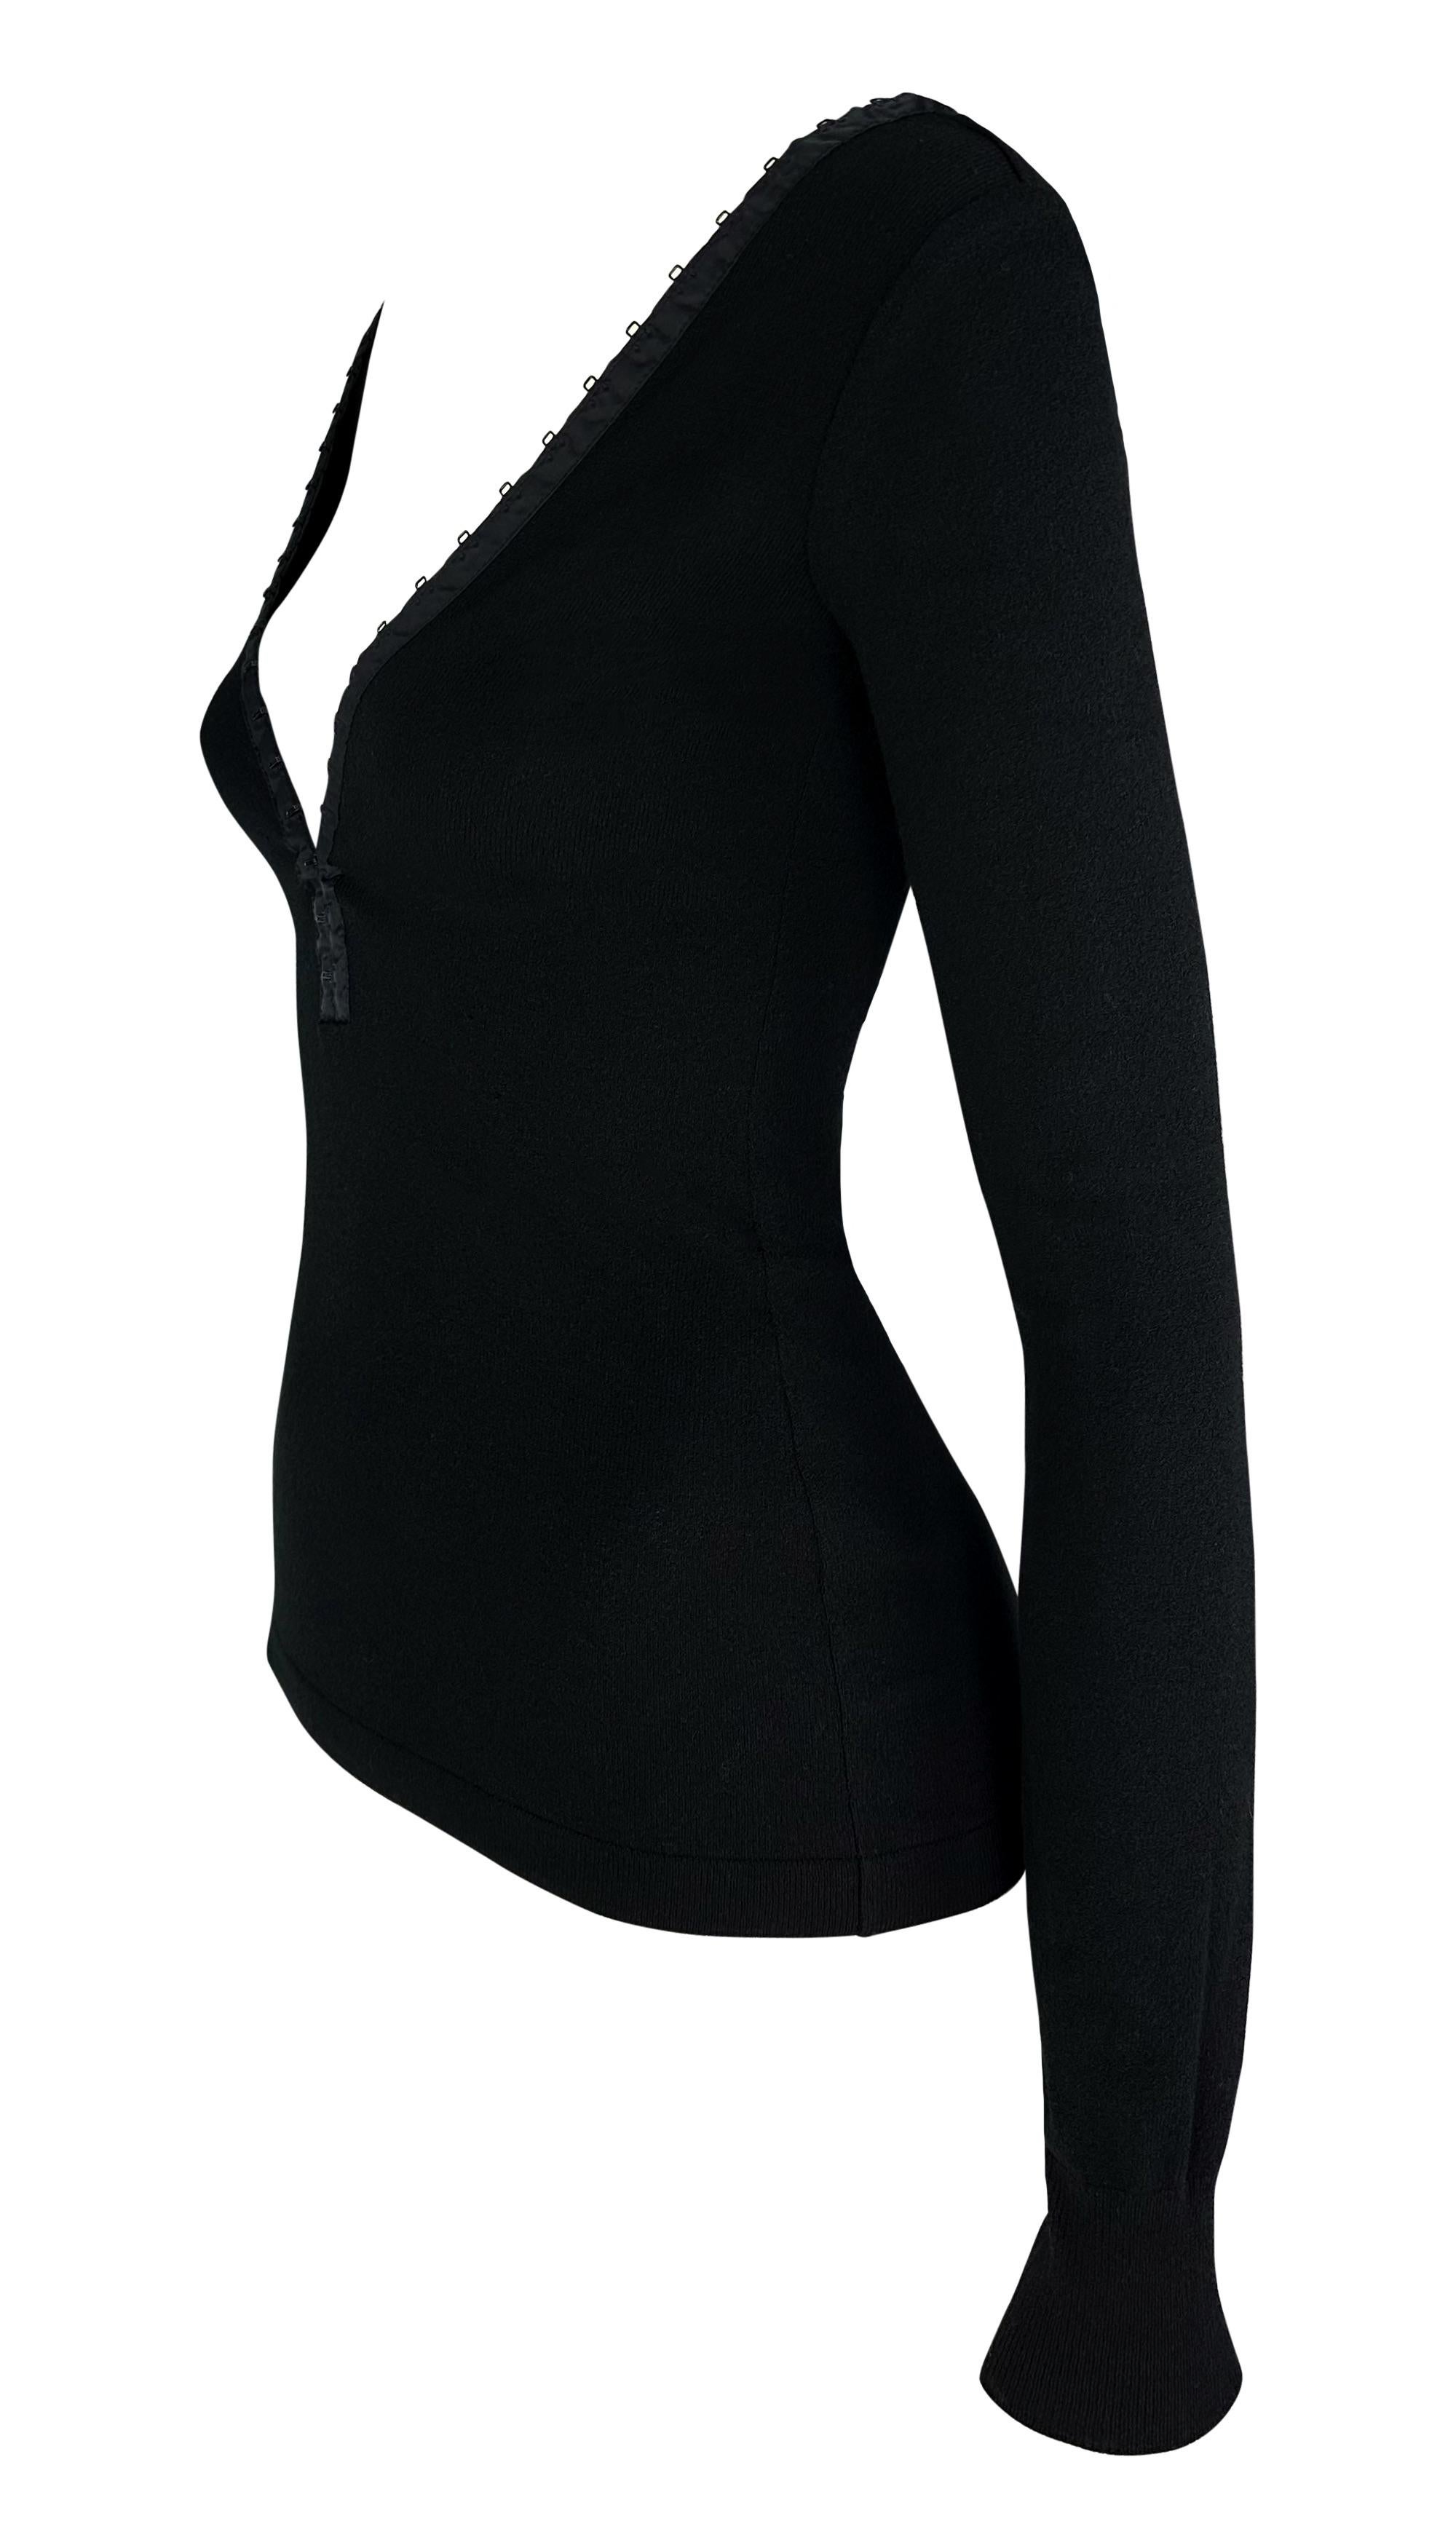 S/S 2003 Dolce & Gabbana Hook & Eye Plunging Black Bodycon Knit Long-Sleeve Top For Sale 1